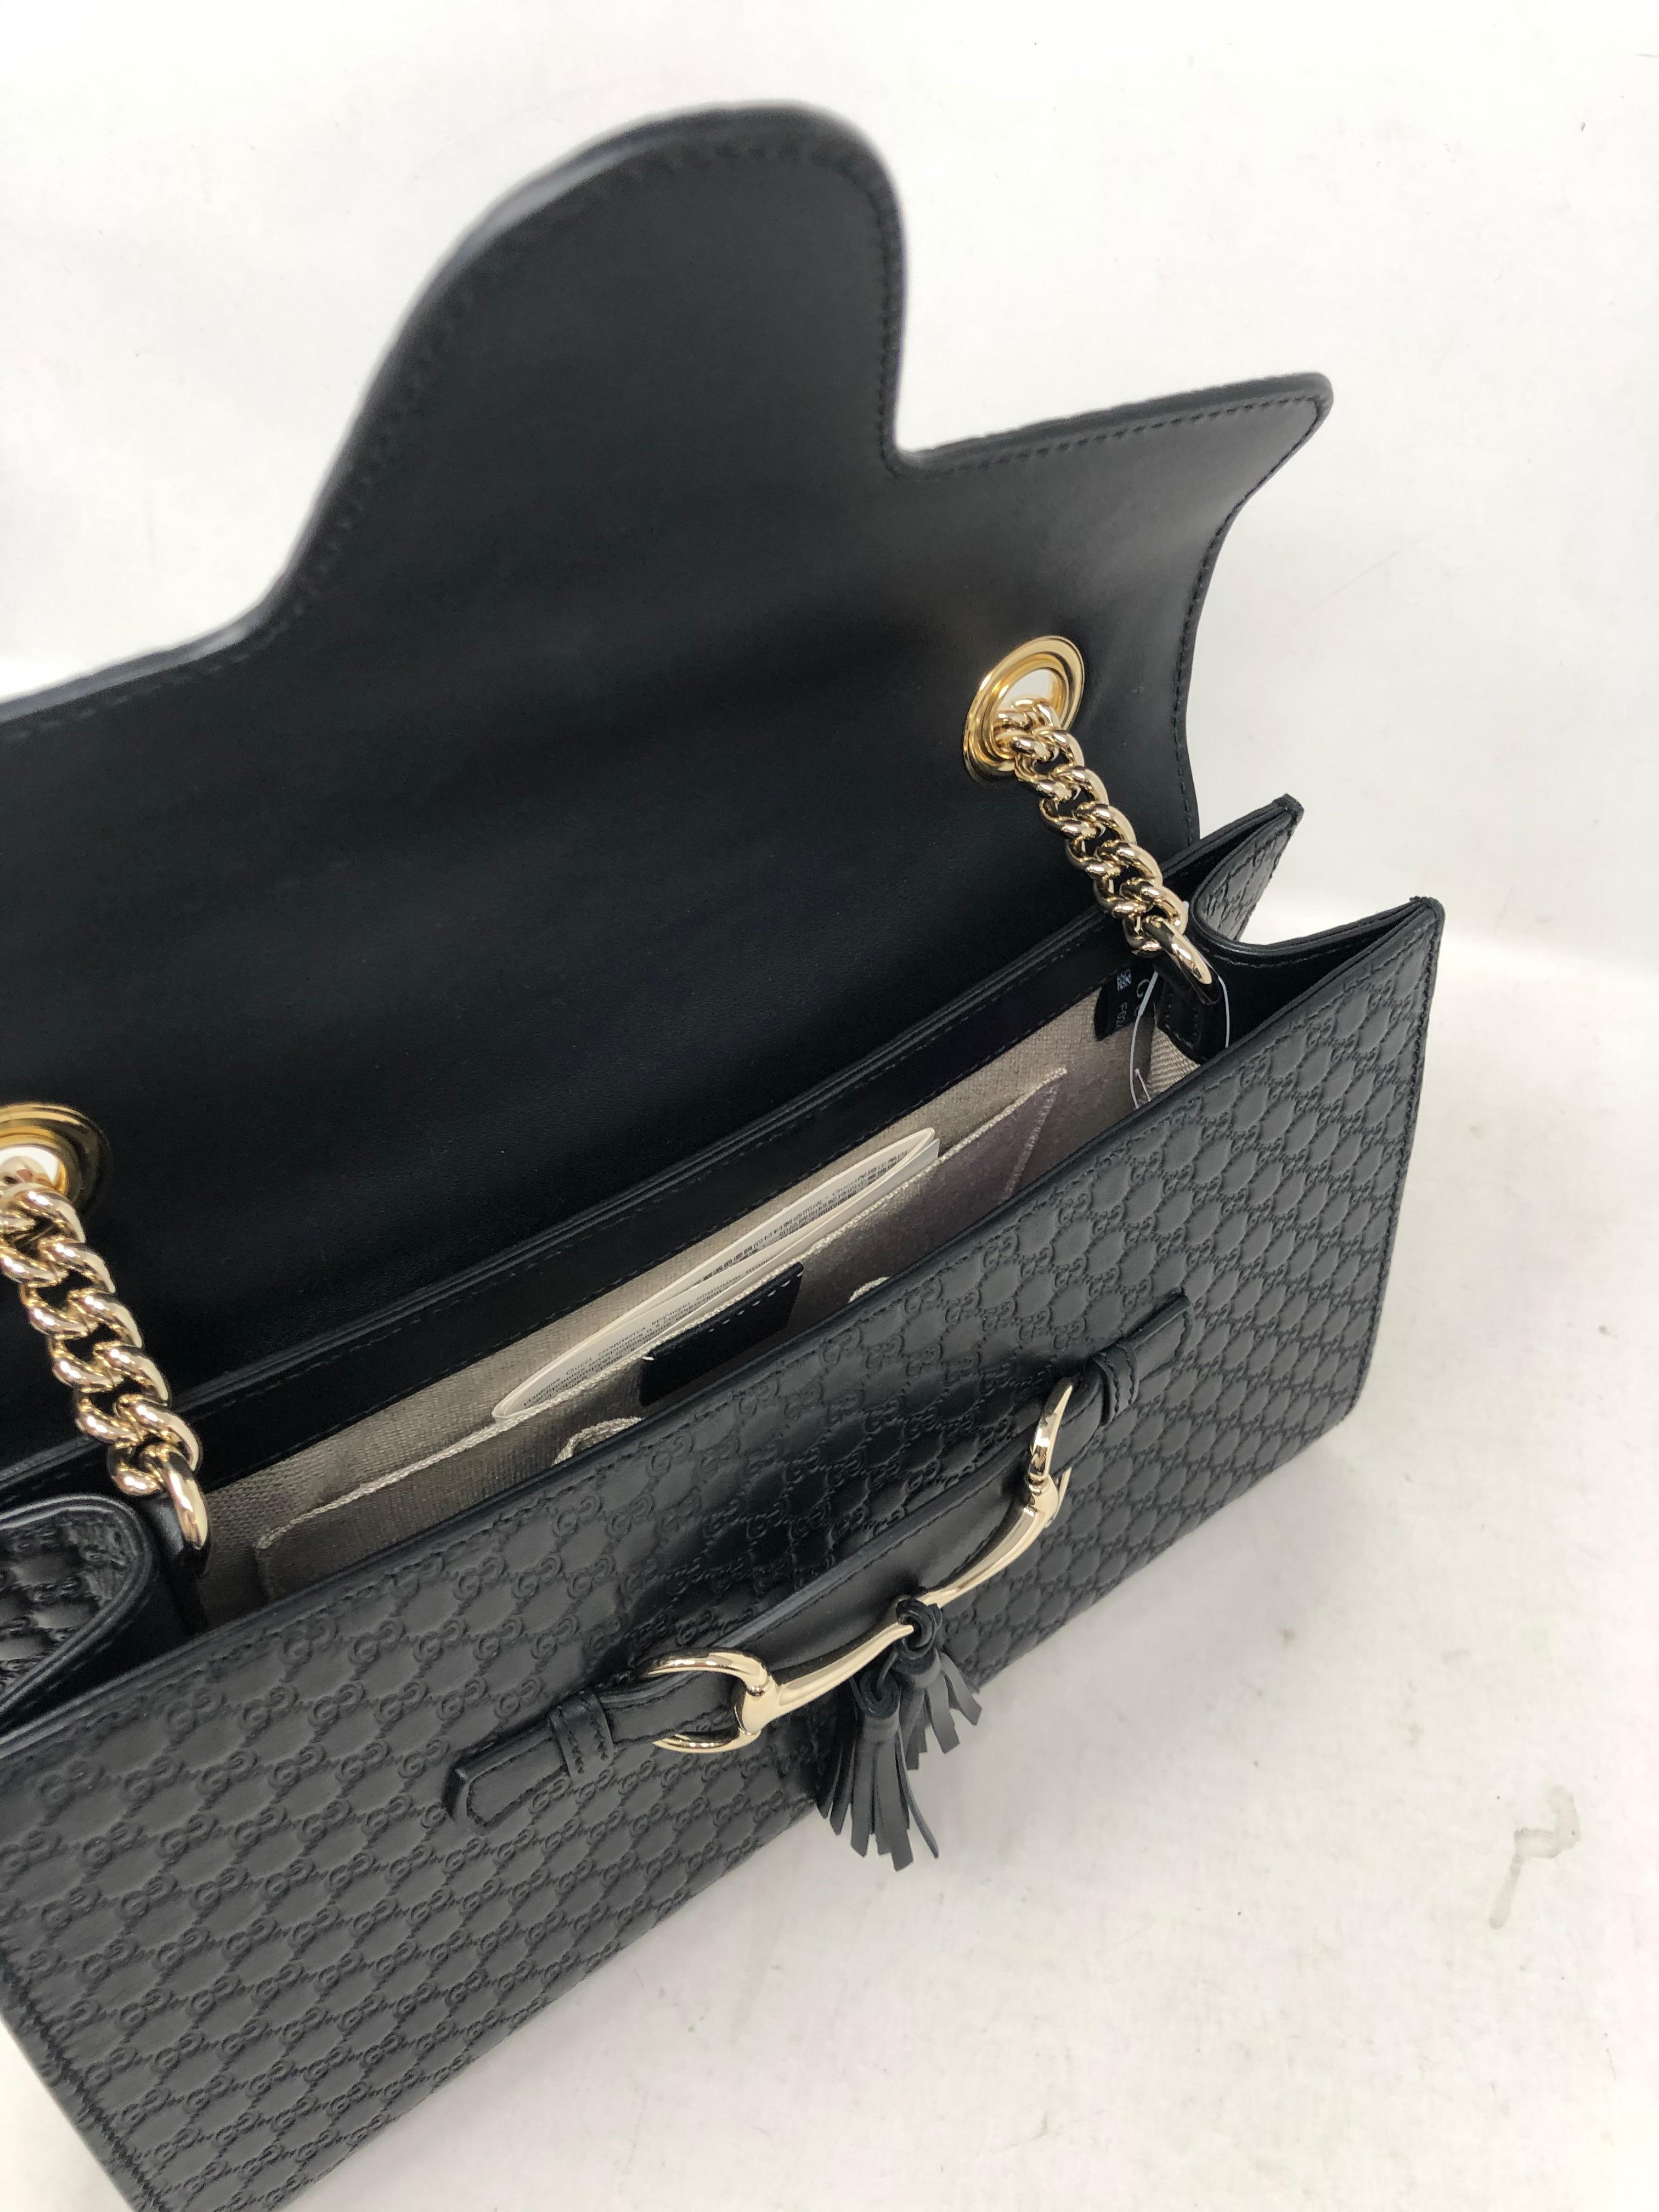 Gucci Embossed Black Leather Bag 6